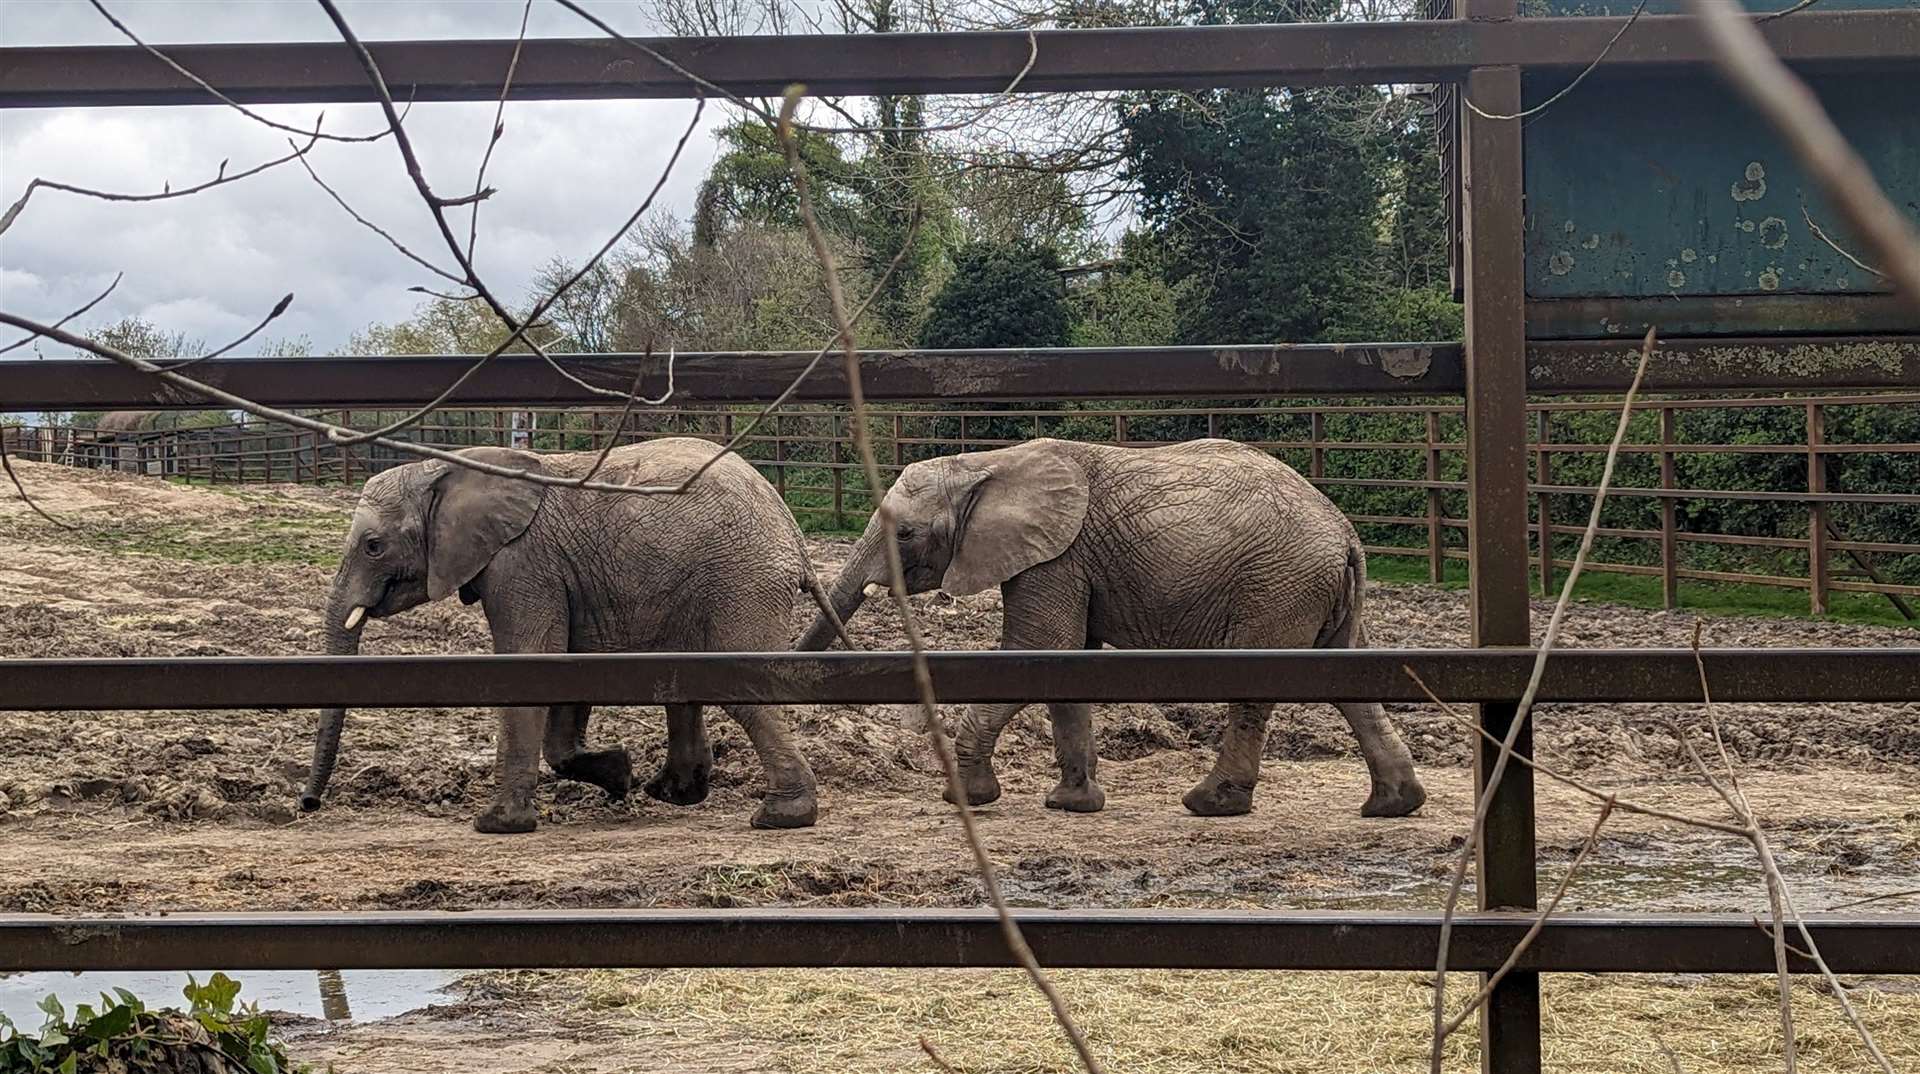 The African elephants at Howletts